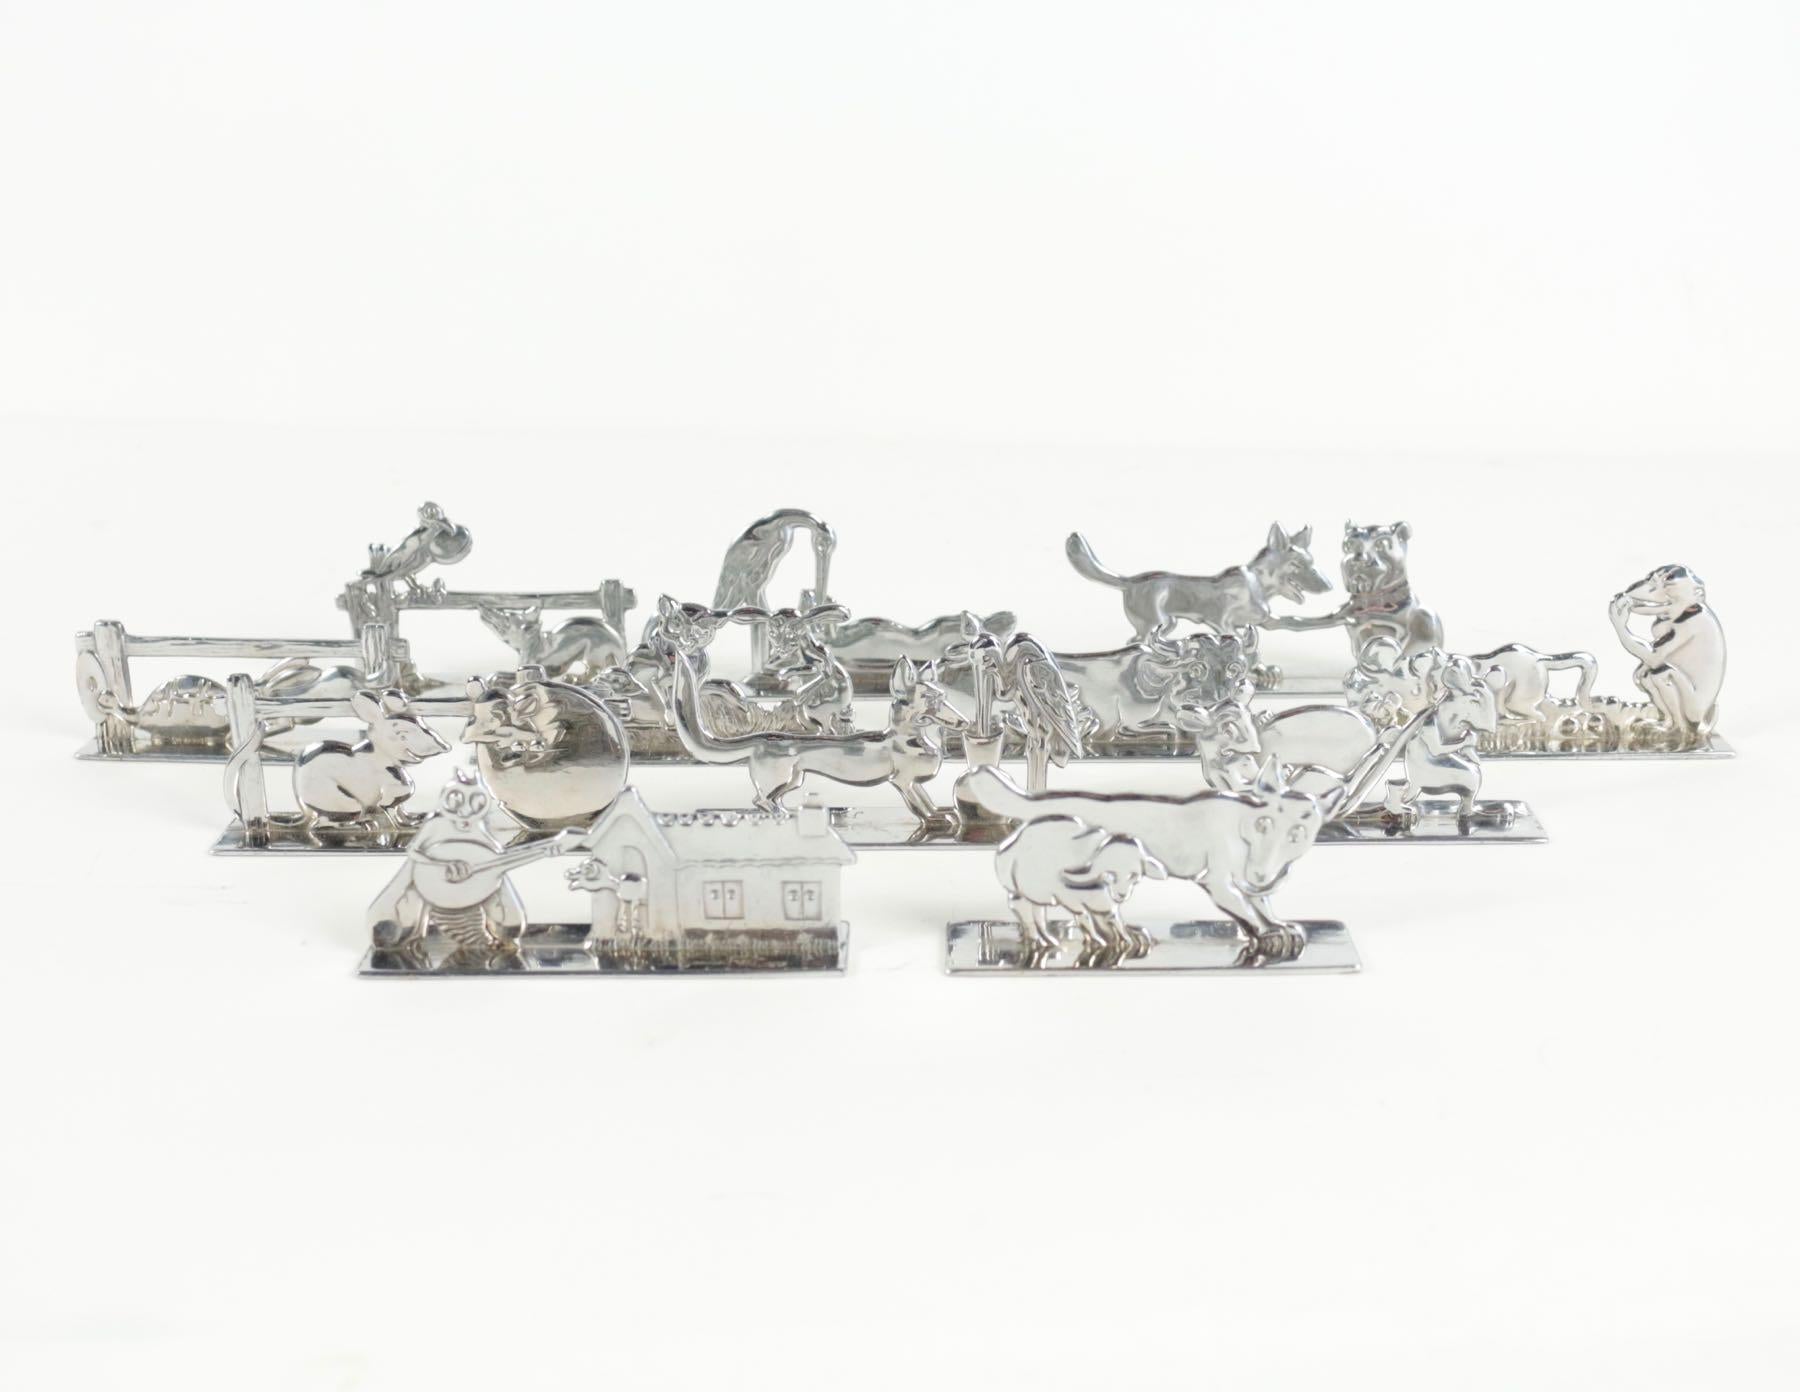 Benjamin Rabier Armand (1869-1939)
Rare service of six knife rests in silver metal, signed by the prestigious artist Benjamin Rabier and the silversmith Pierre Devouge. 
 Boxed set of animalier knife rests, (12) 
Date : circa 1925
Comprising